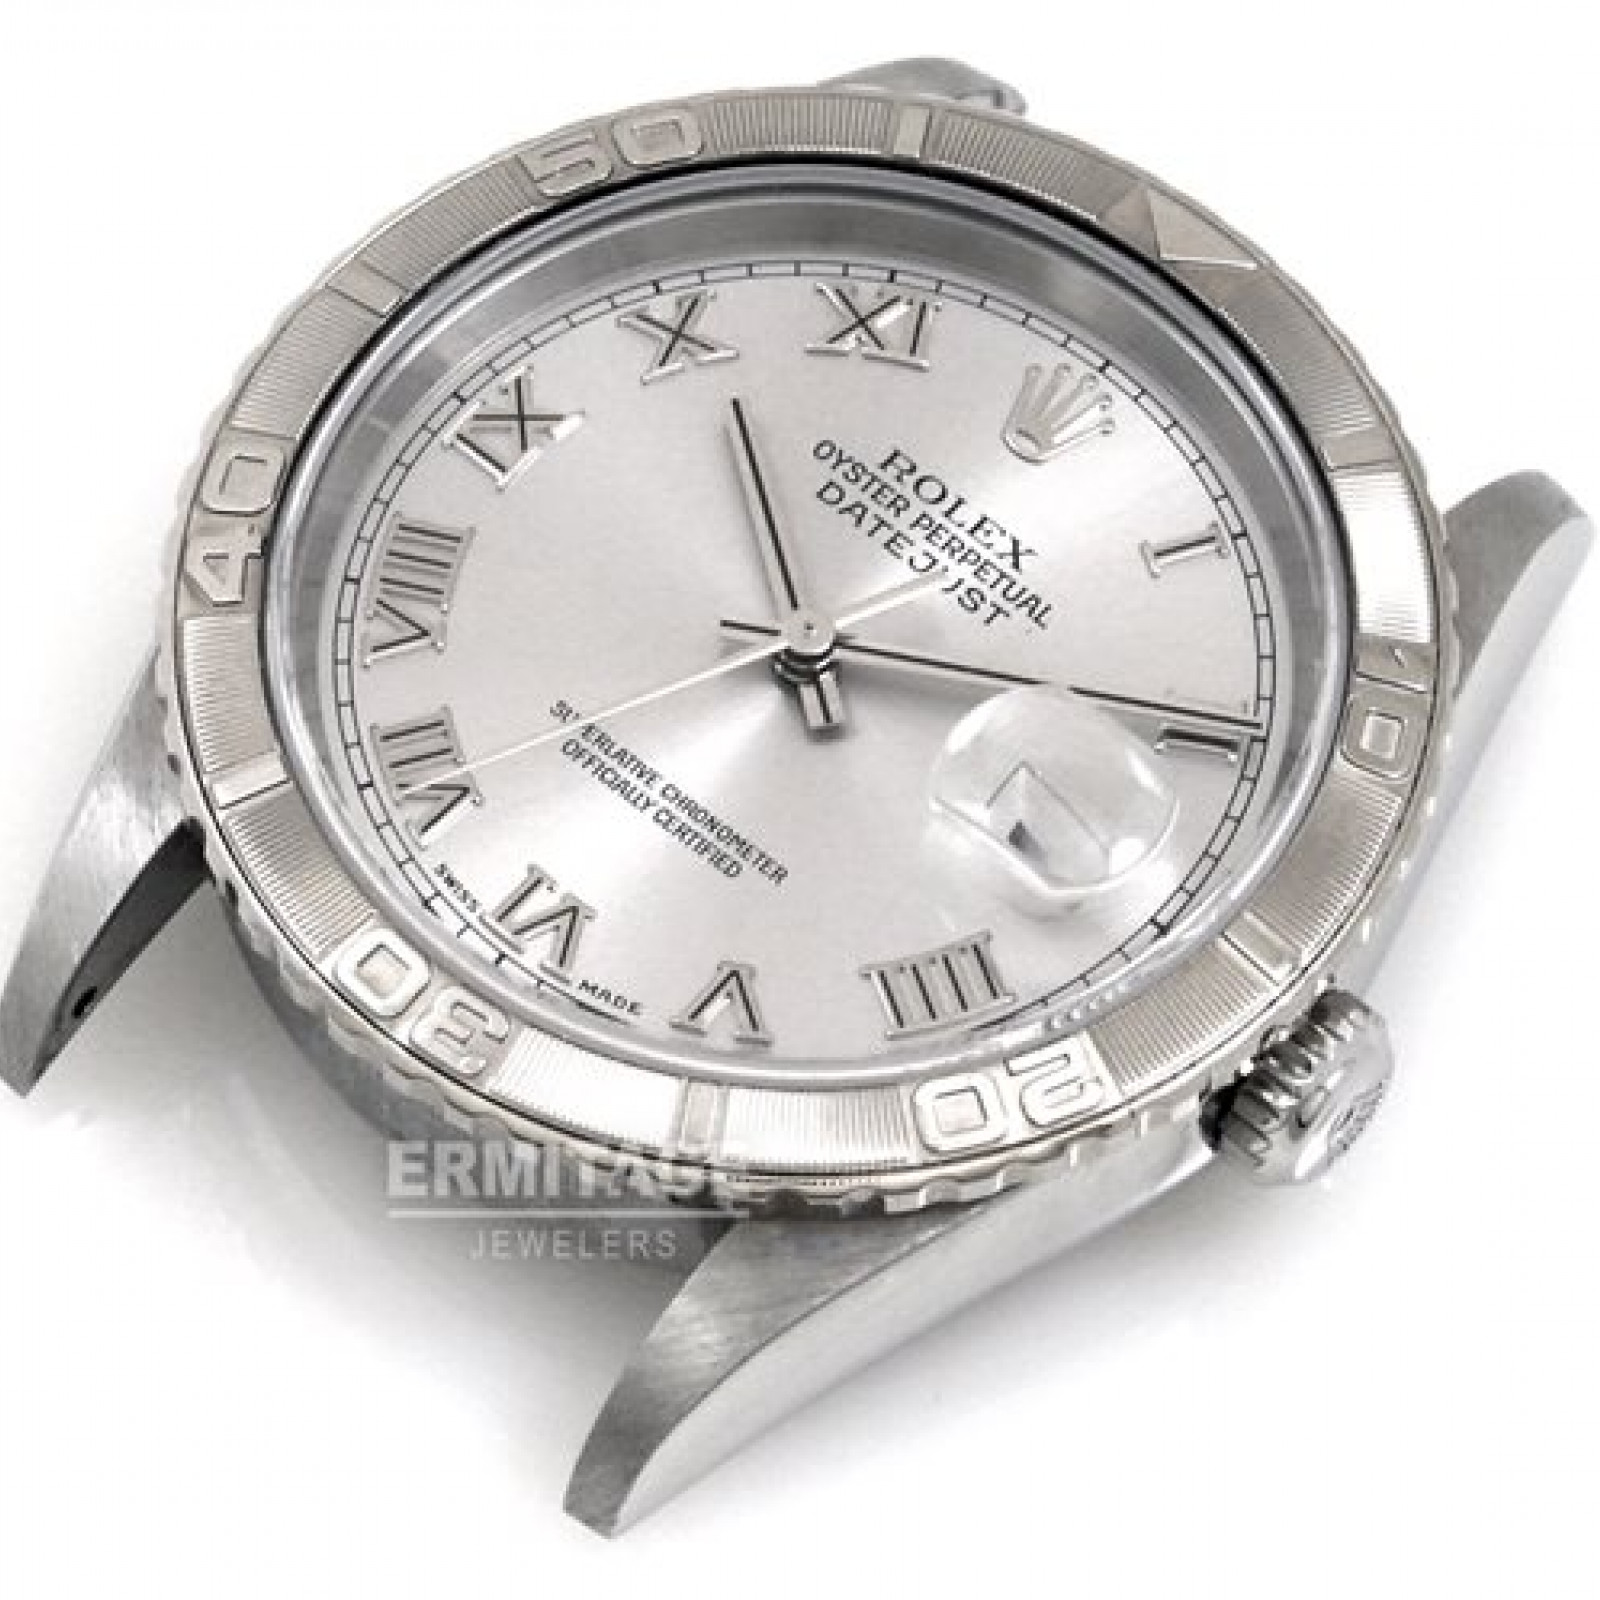 Rolex Datejust Turn-O-Graph 16264 Stainless Steel